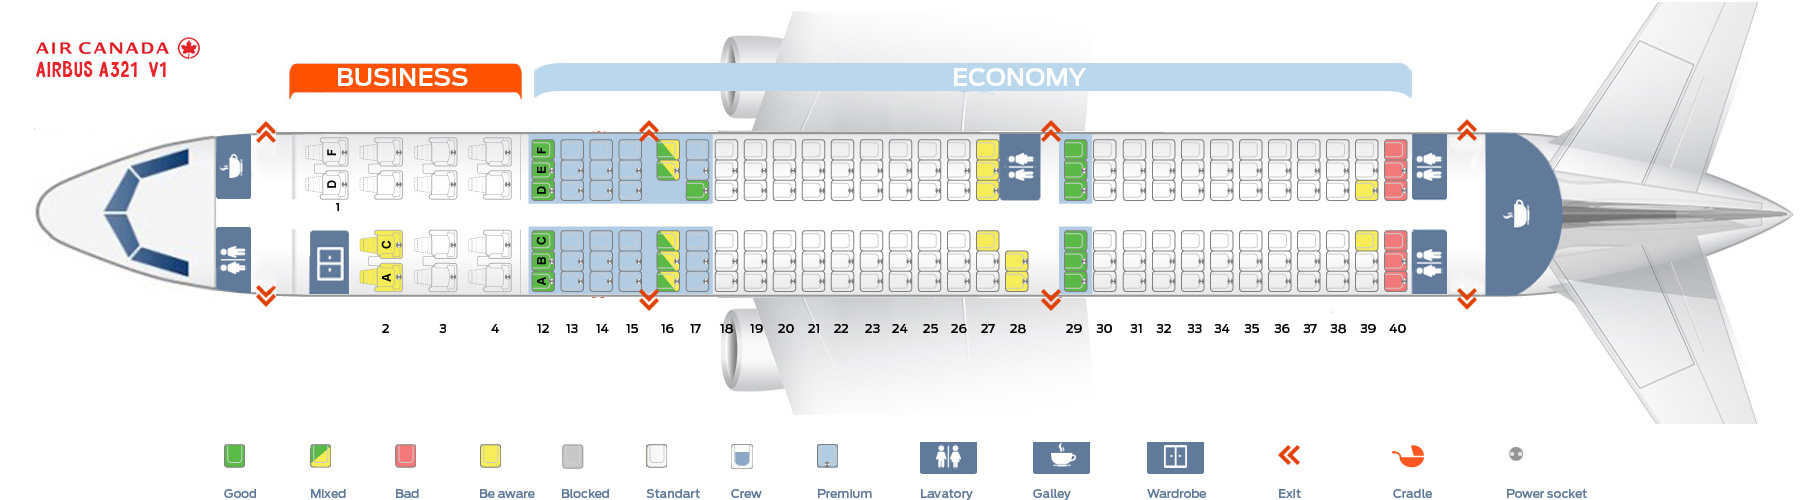 Air Canada Seating Chart With Seat Numbers